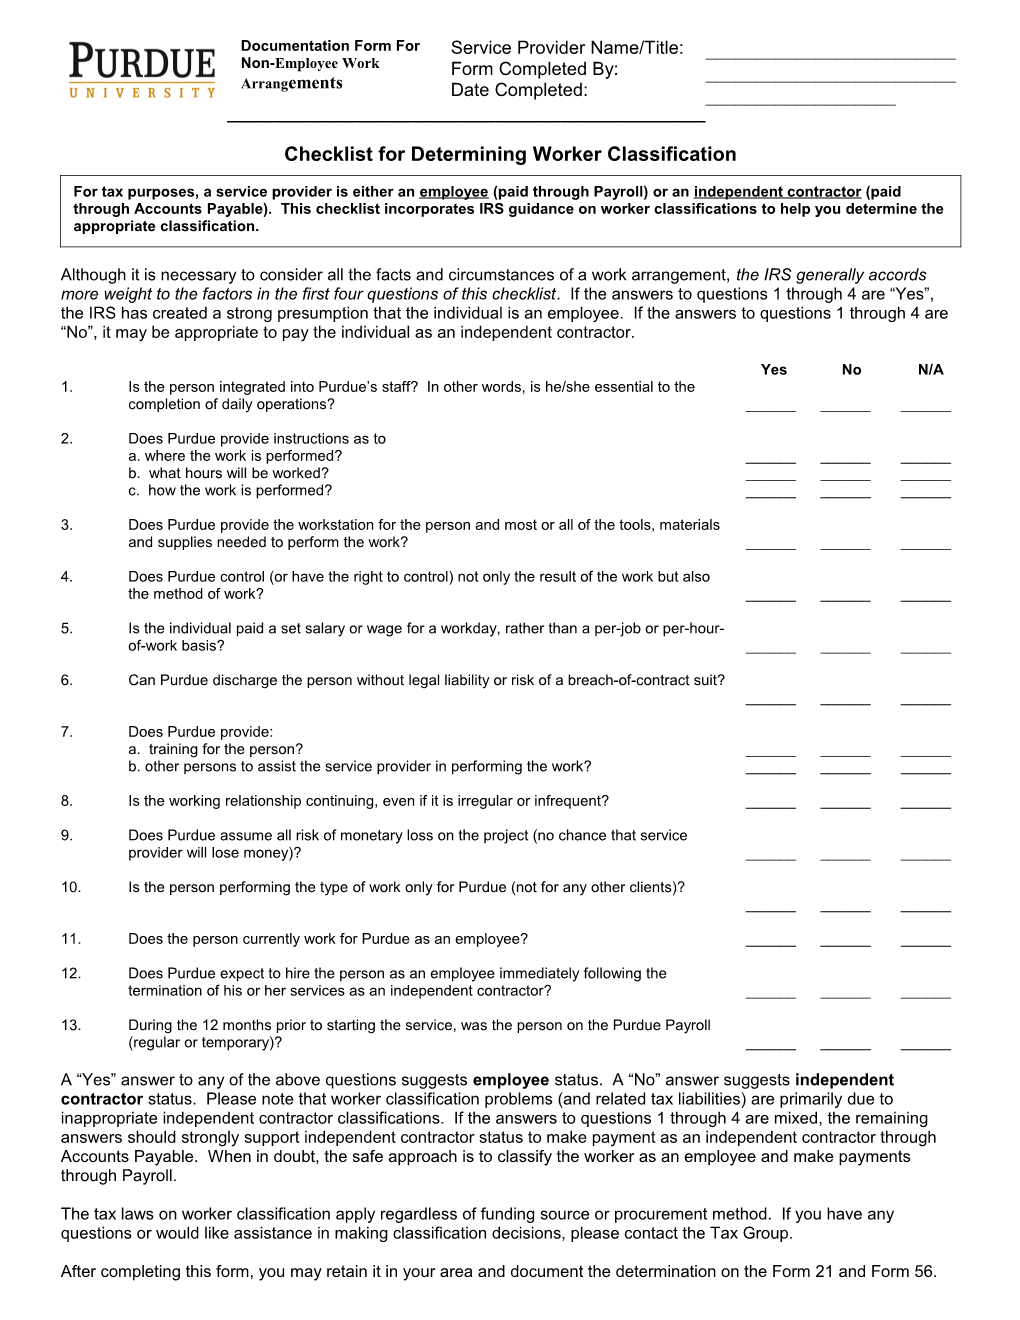 Checklist for Determining Worker Classification